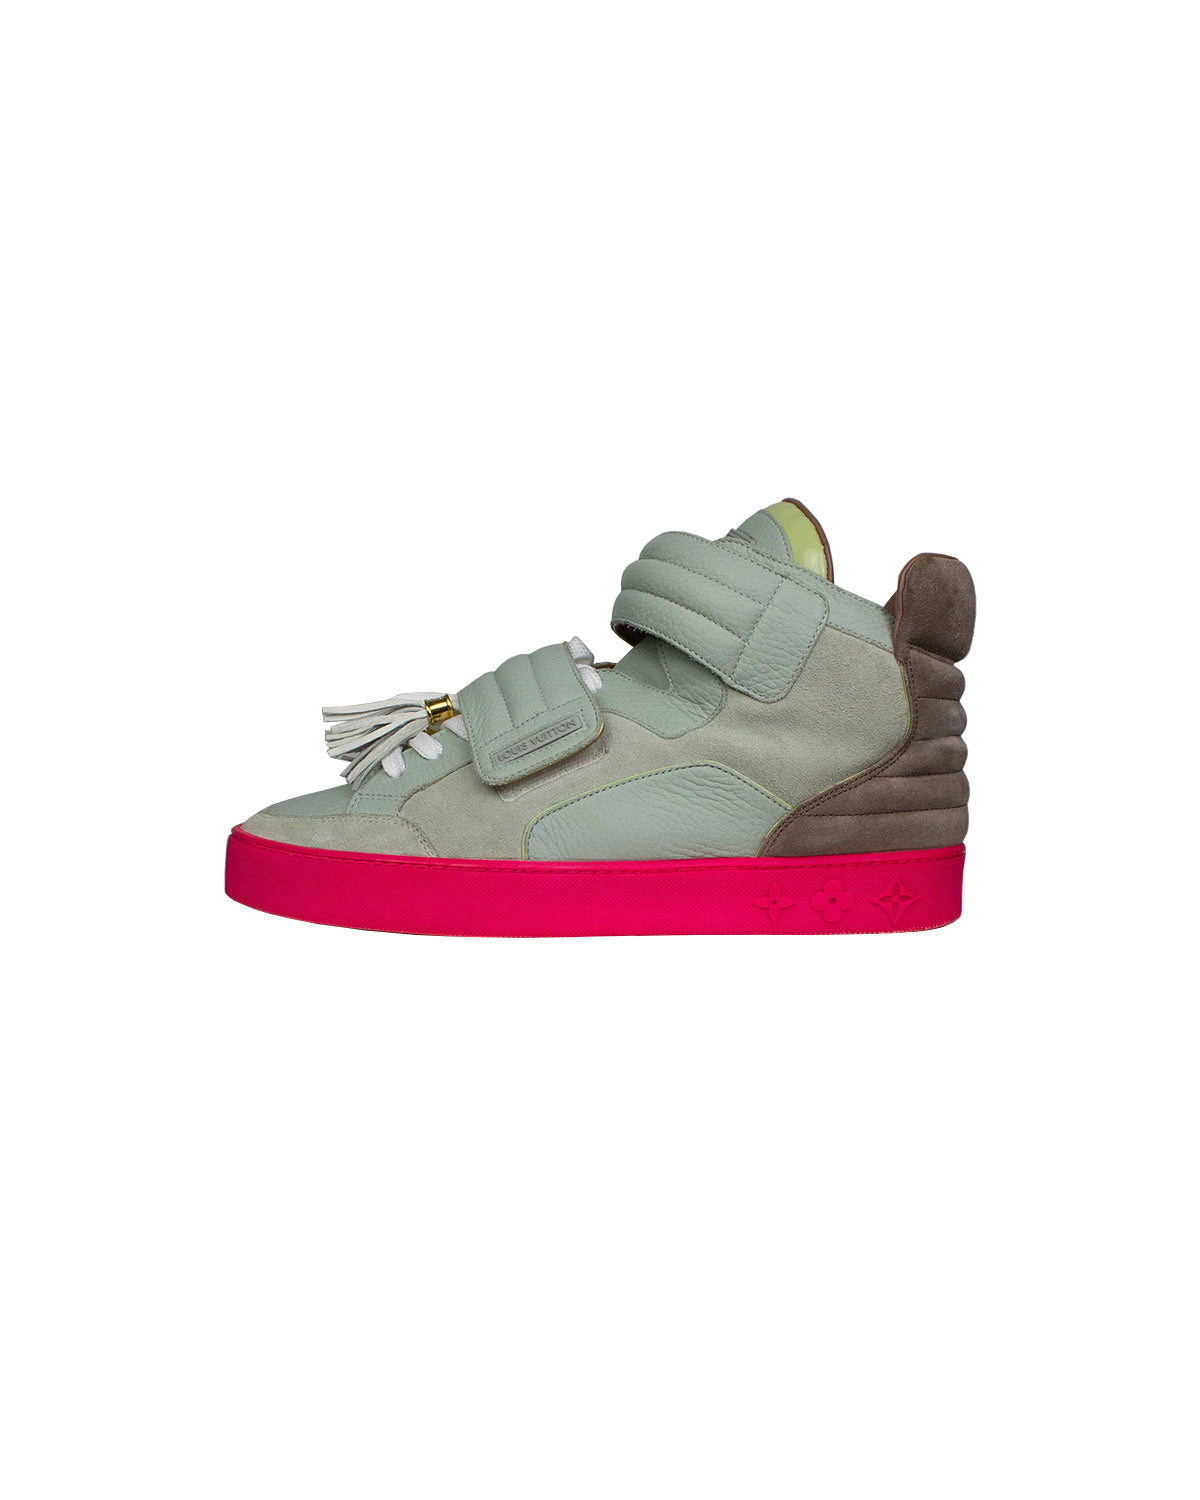 Louis Vuitton Jaspers Kanye Patchwork Grey/Pink - Mens, Size 13